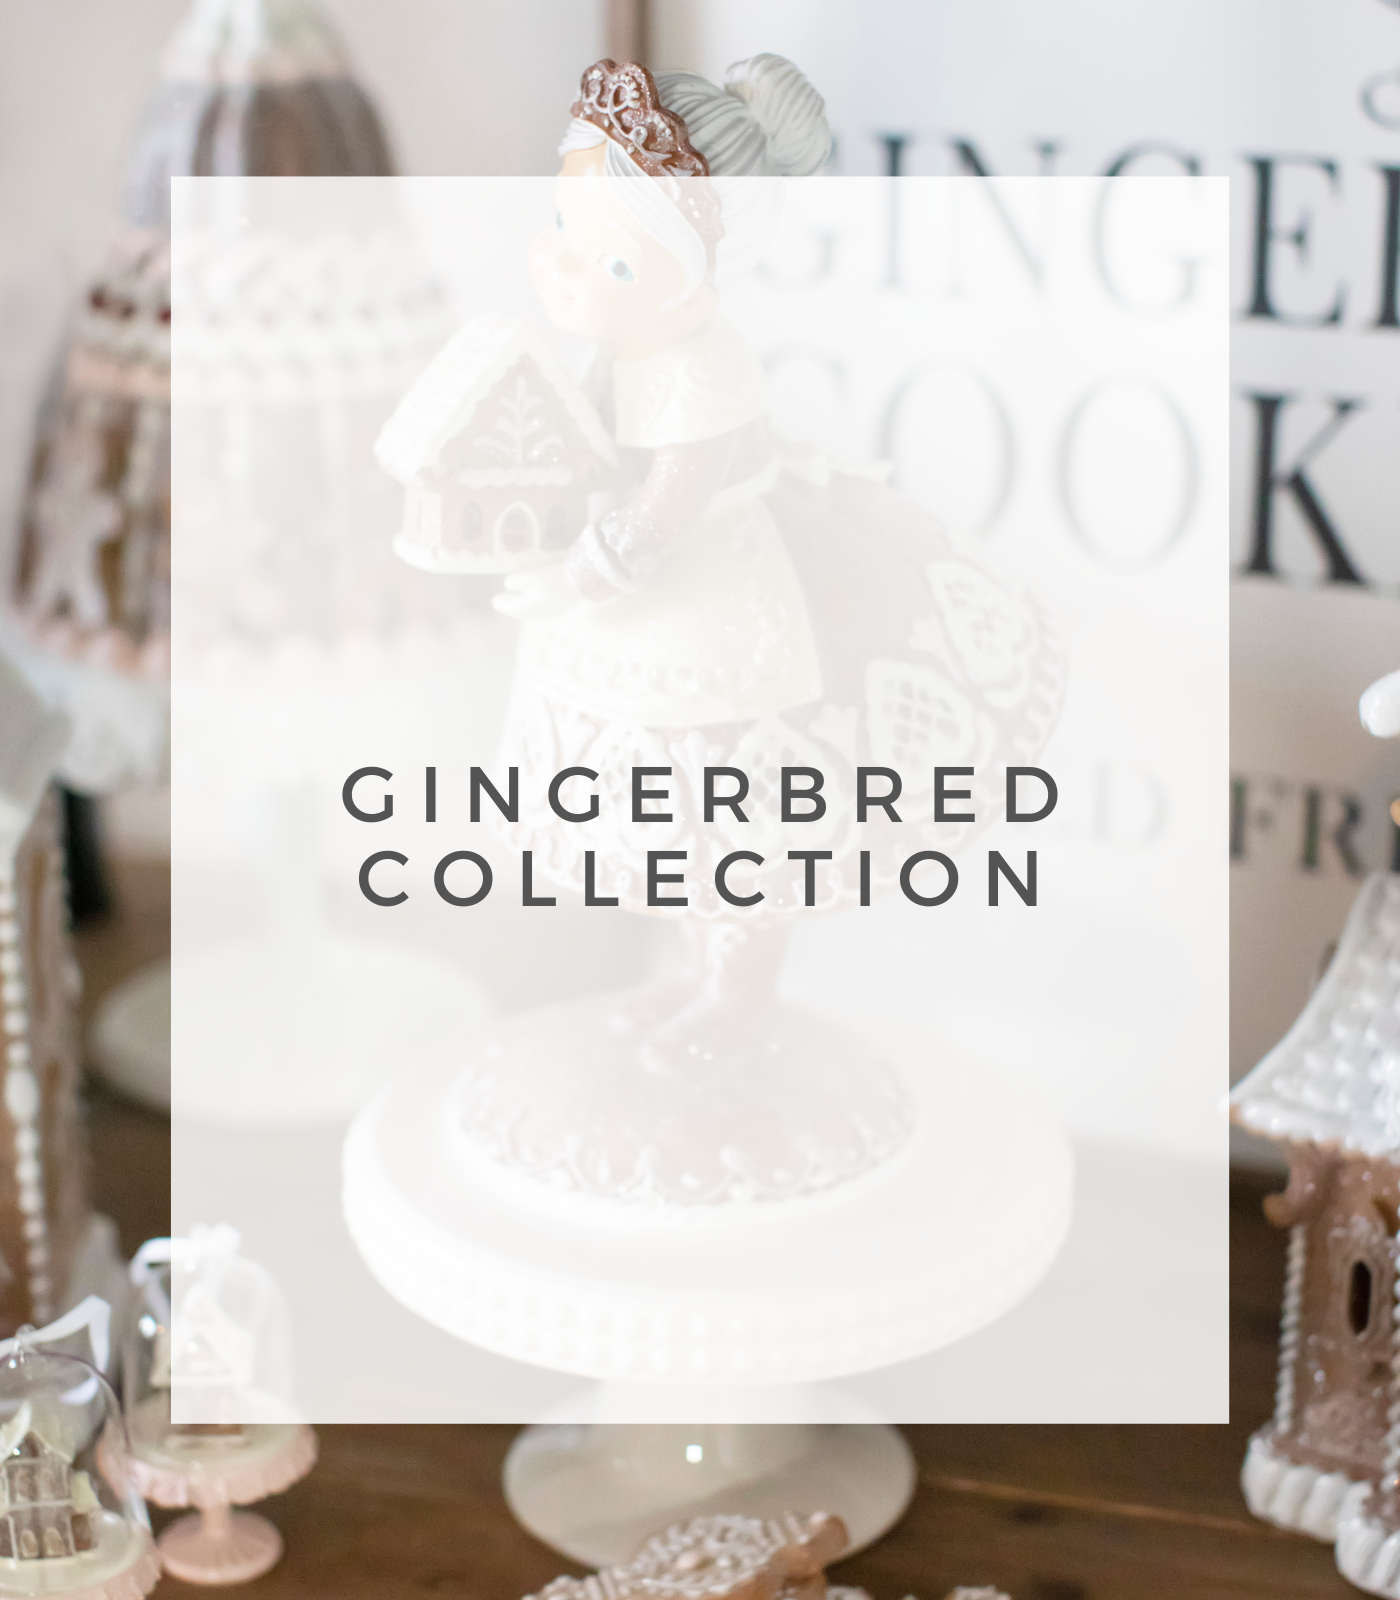 GINGERBREAD COLLECTION